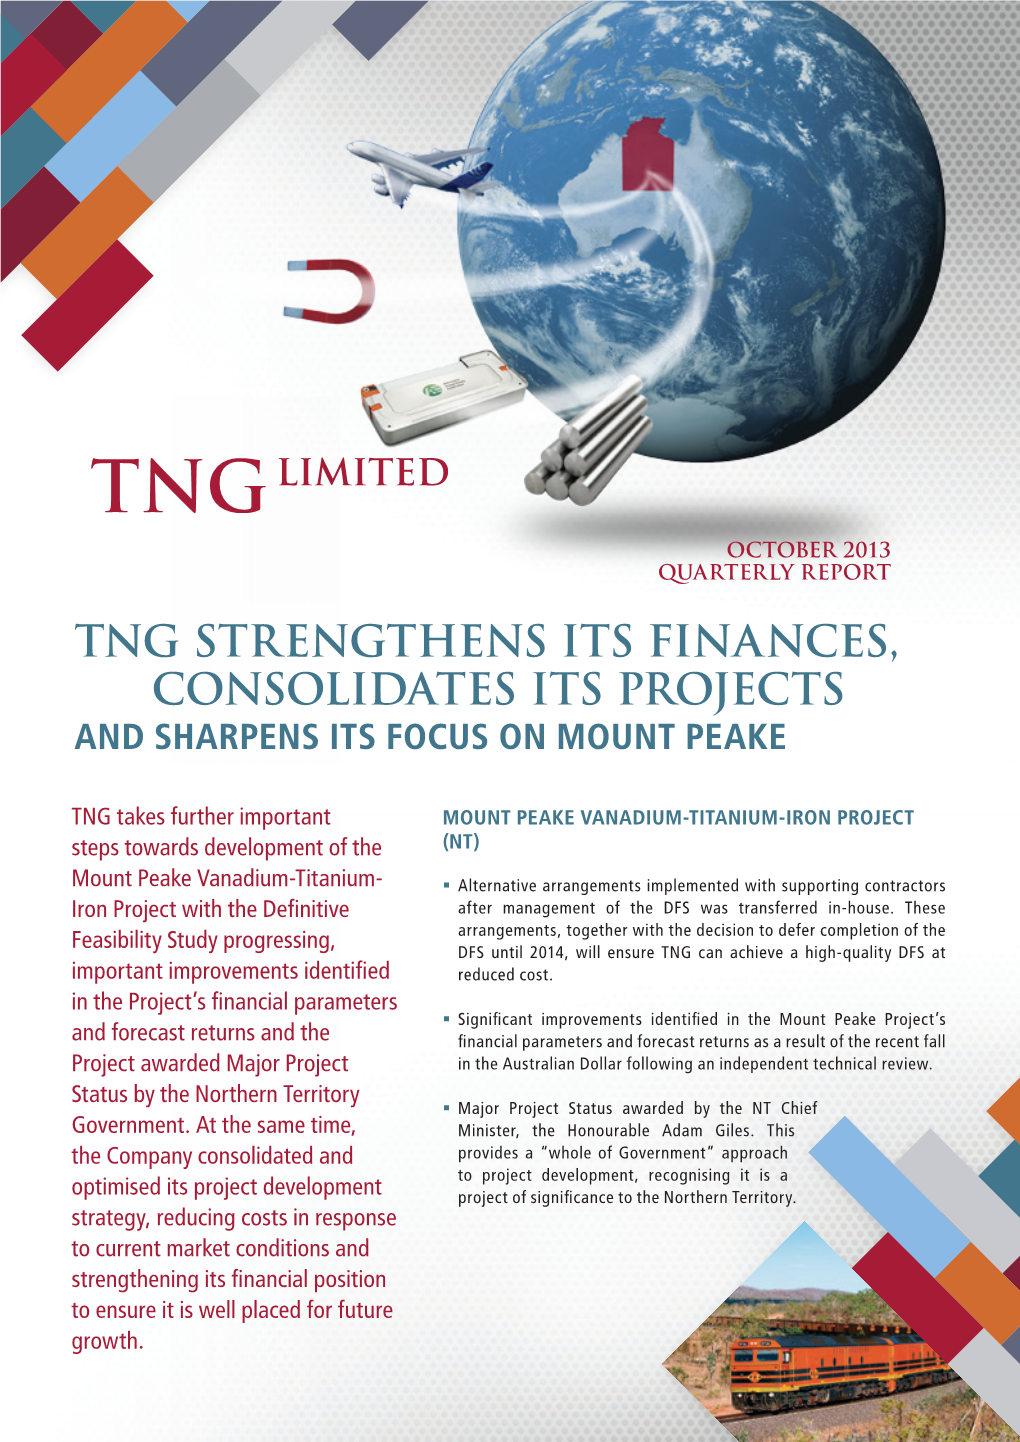 Tng Strengthens Its Finances, Consolidates Its Projects and Sharpens Its Focus on Mount Peake